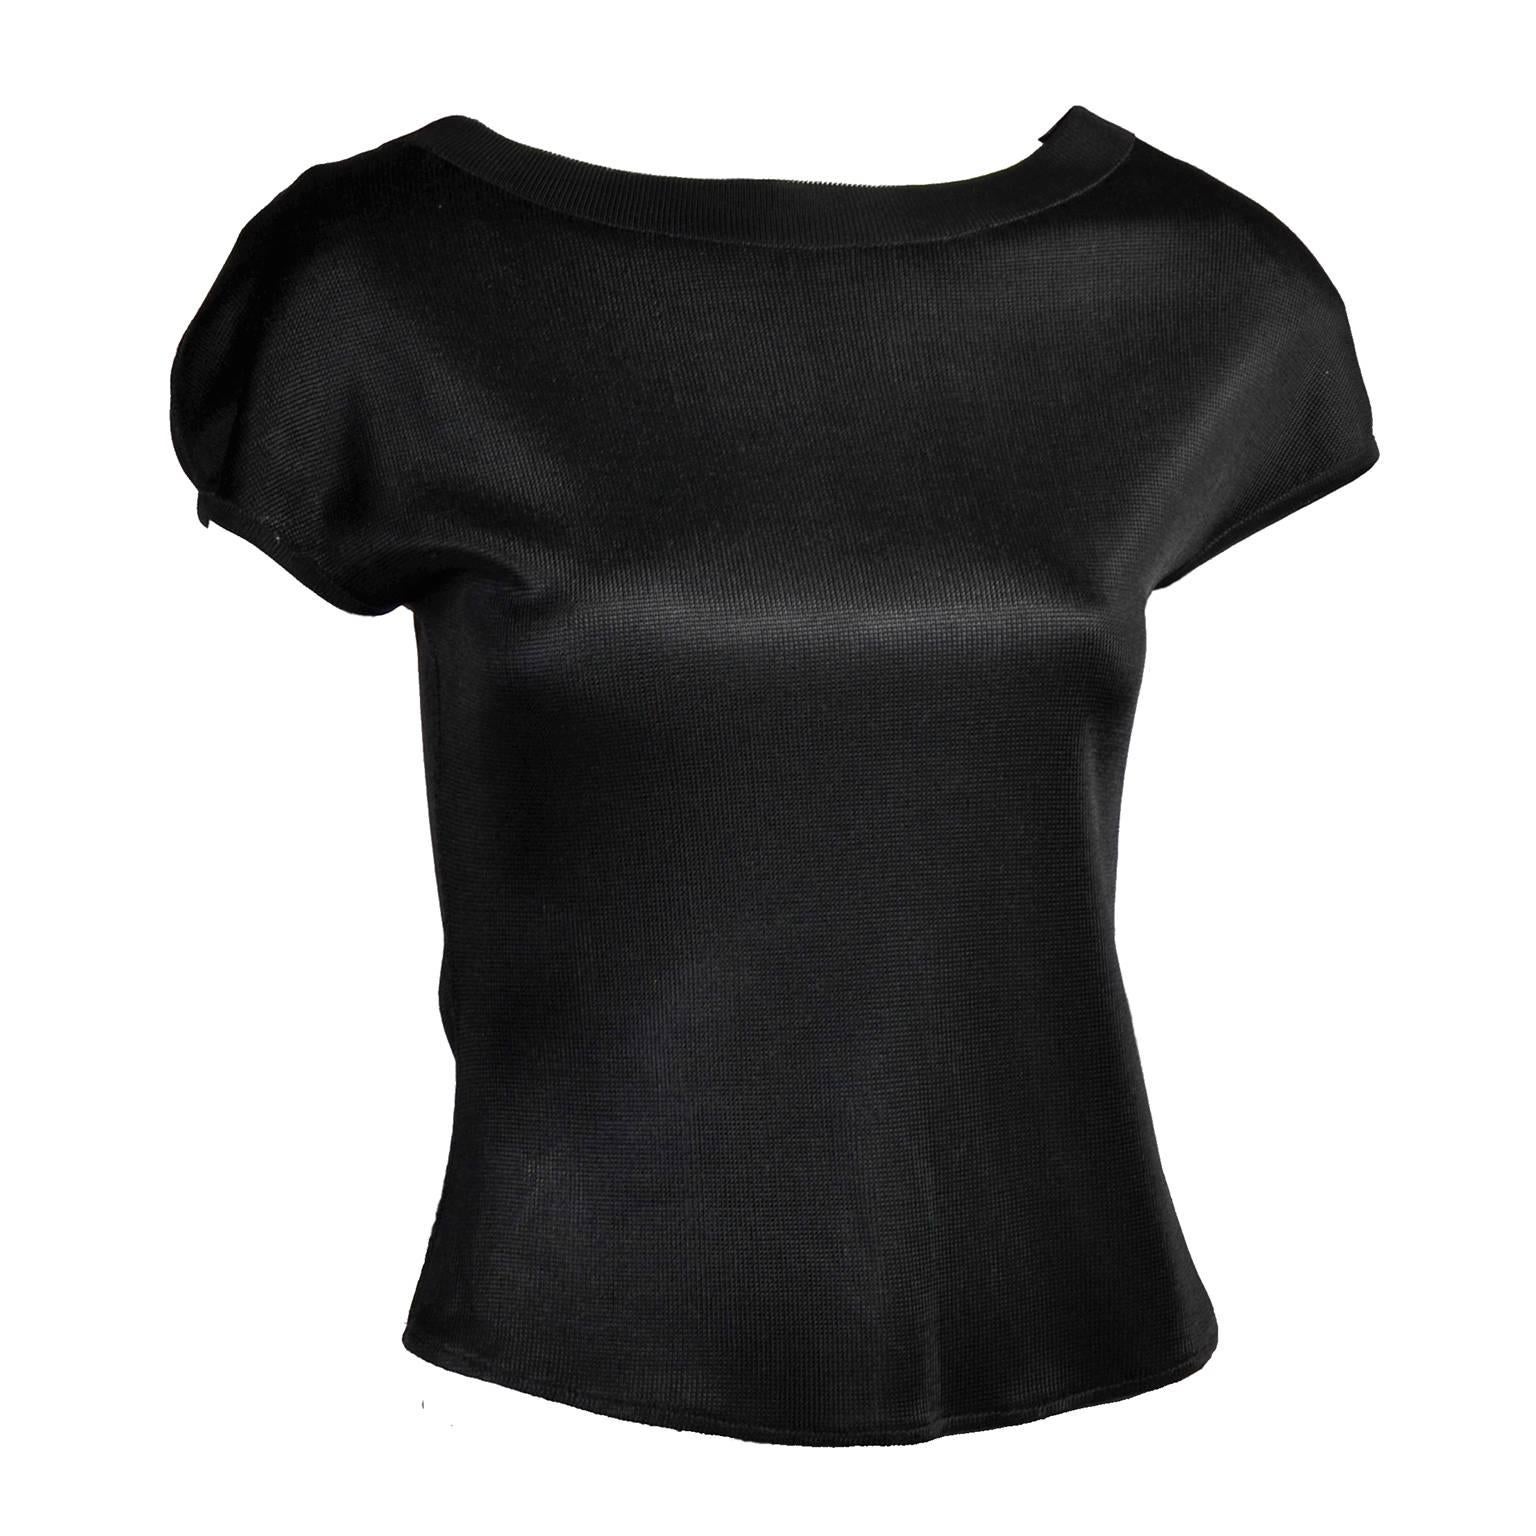 This is a great Alaia vintage top from the late 1980's or early 1990's in black acetate with shoulder pads and back buttons.  Labeled a large, it fits a size M/L depending on how loose you like to wear your tops. 